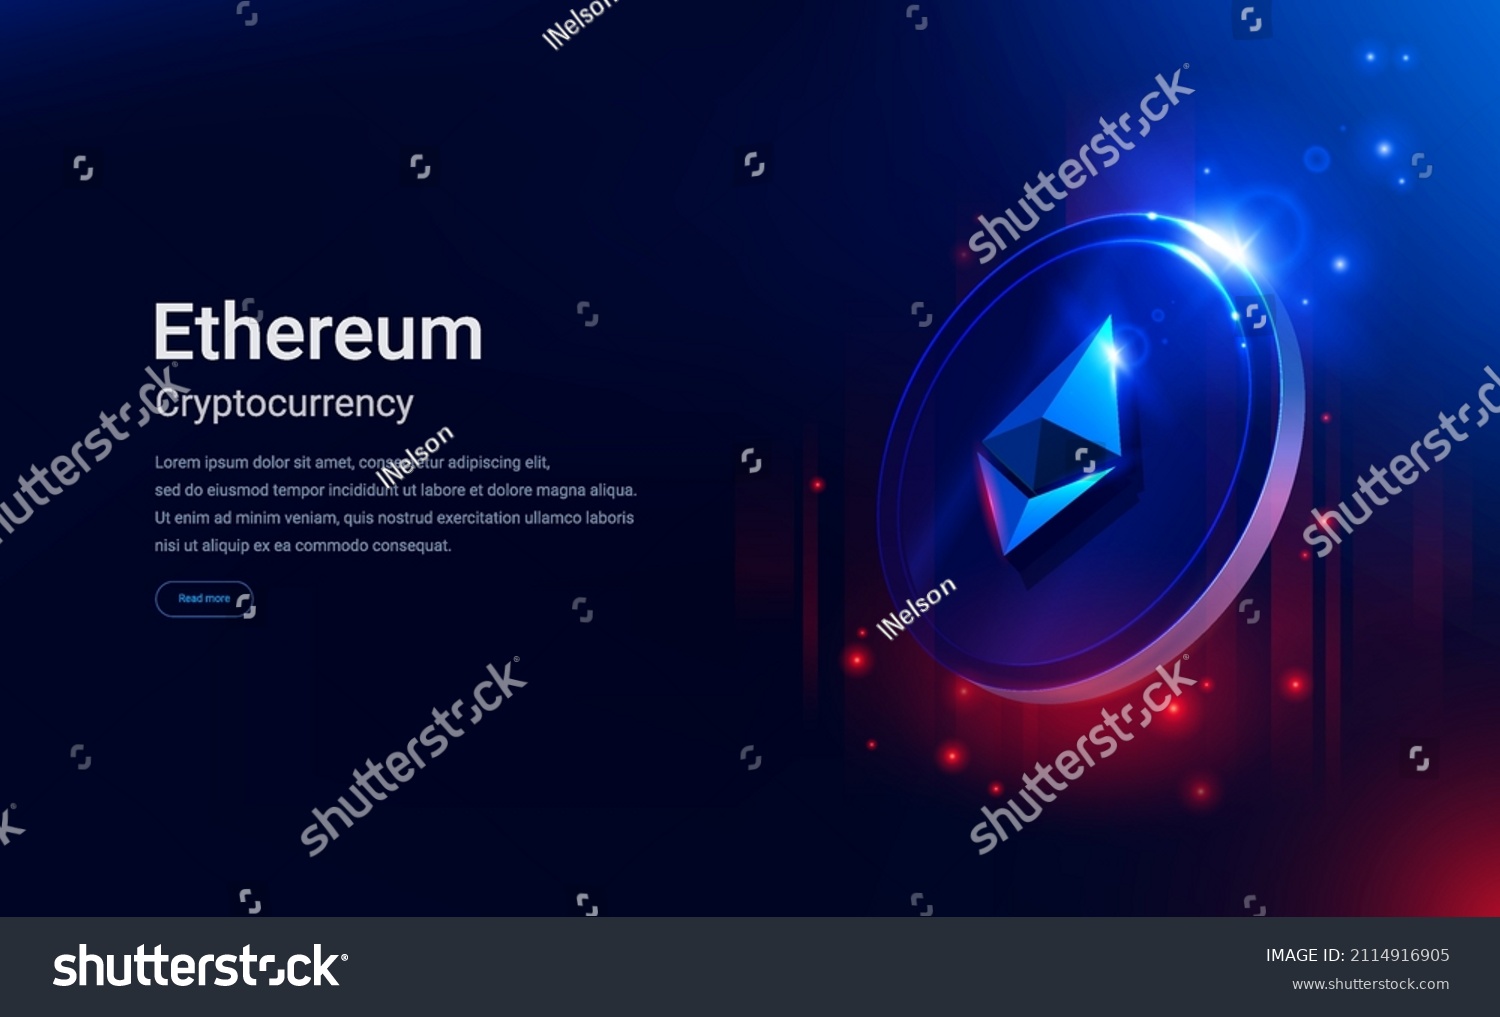 SVG of Ethereum digital banner currency. ETH cryptocurrency. Blockchain. Data transmission and processing. Digital Technologies. svg